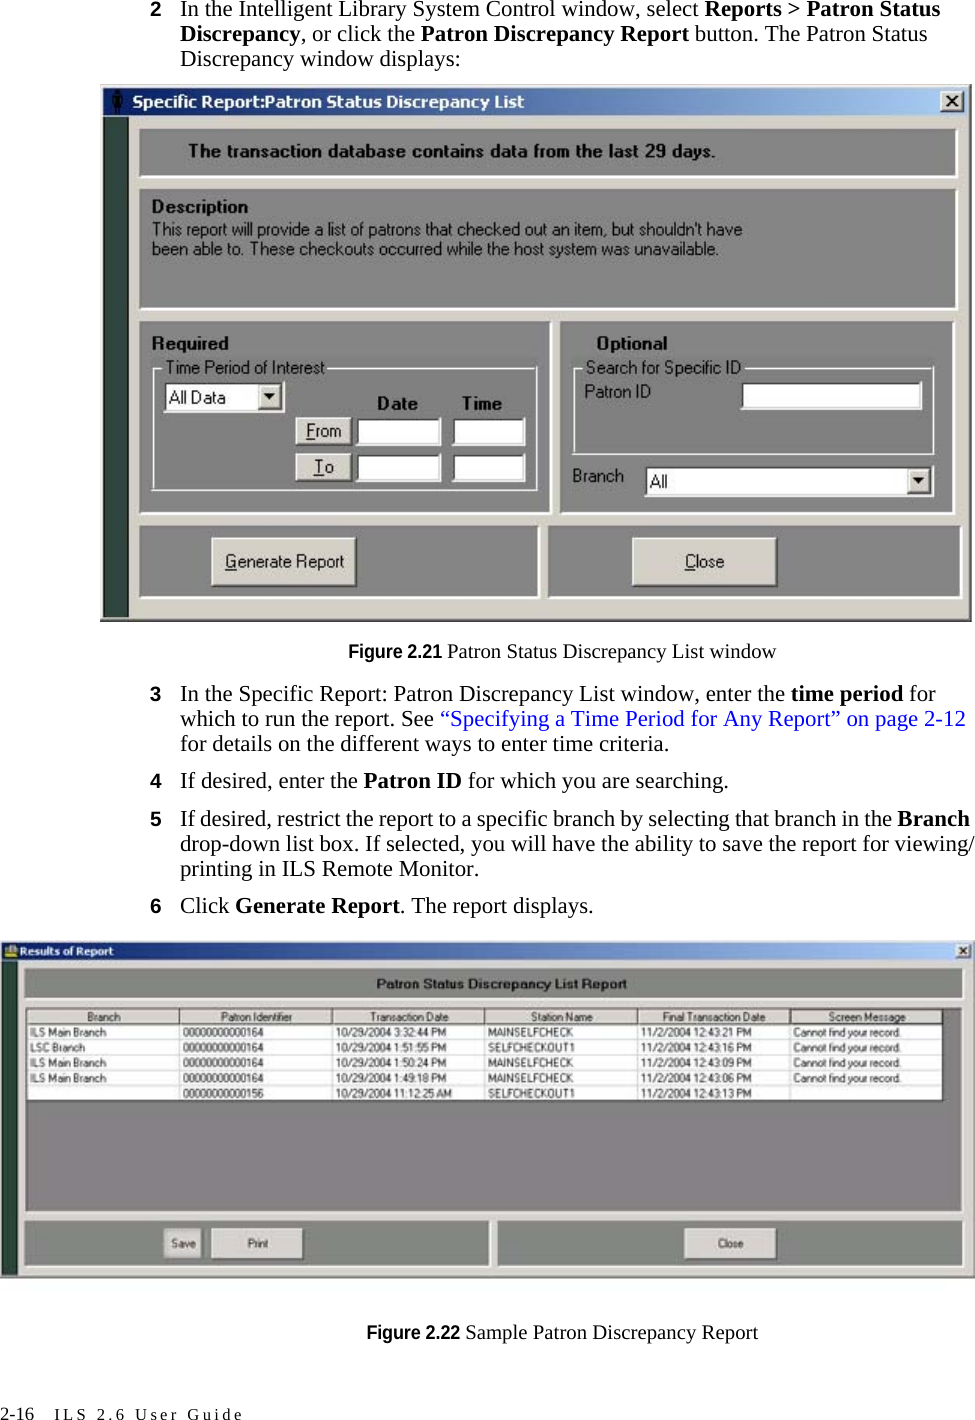 2-16 ILS 2.6 User Guide2In the Intelligent Library System Control window, select Reports &gt; Patron Status Discrepancy, or click the Patron Discrepancy Report button. The Patron Status Discrepancy window displays:Figure 2.21 Patron Status Discrepancy List window3In the Specific Report: Patron Discrepancy List window, enter the time period for which to run the report. See “Specifying a Time Period for Any Report” on page 2-12 for details on the different ways to enter time criteria.4If desired, enter the Patron ID for which you are searching.5If desired, restrict the report to a specific branch by selecting that branch in the Branch drop-down list box. If selected, you will have the ability to save the report for viewing/printing in ILS Remote Monitor.6Click Generate Report. The report displays.Figure 2.22 Sample Patron Discrepancy Report 